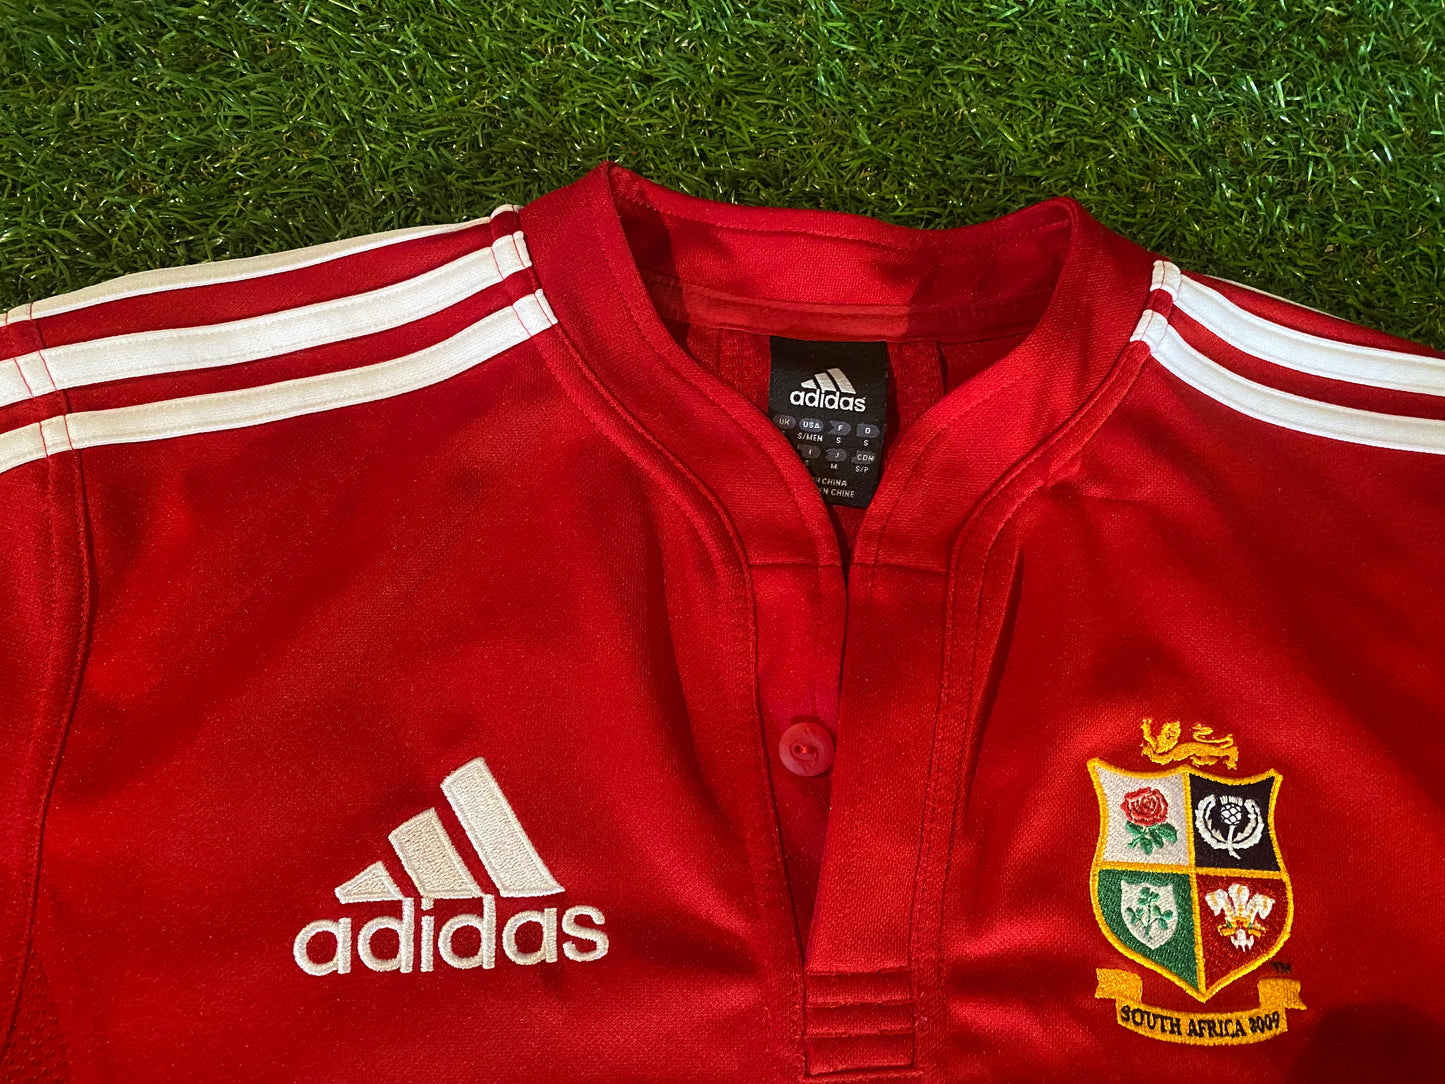 British & Irish Lions Rugby Union Football Small Mans 2009 Adidas Tour of South Africa Jersey